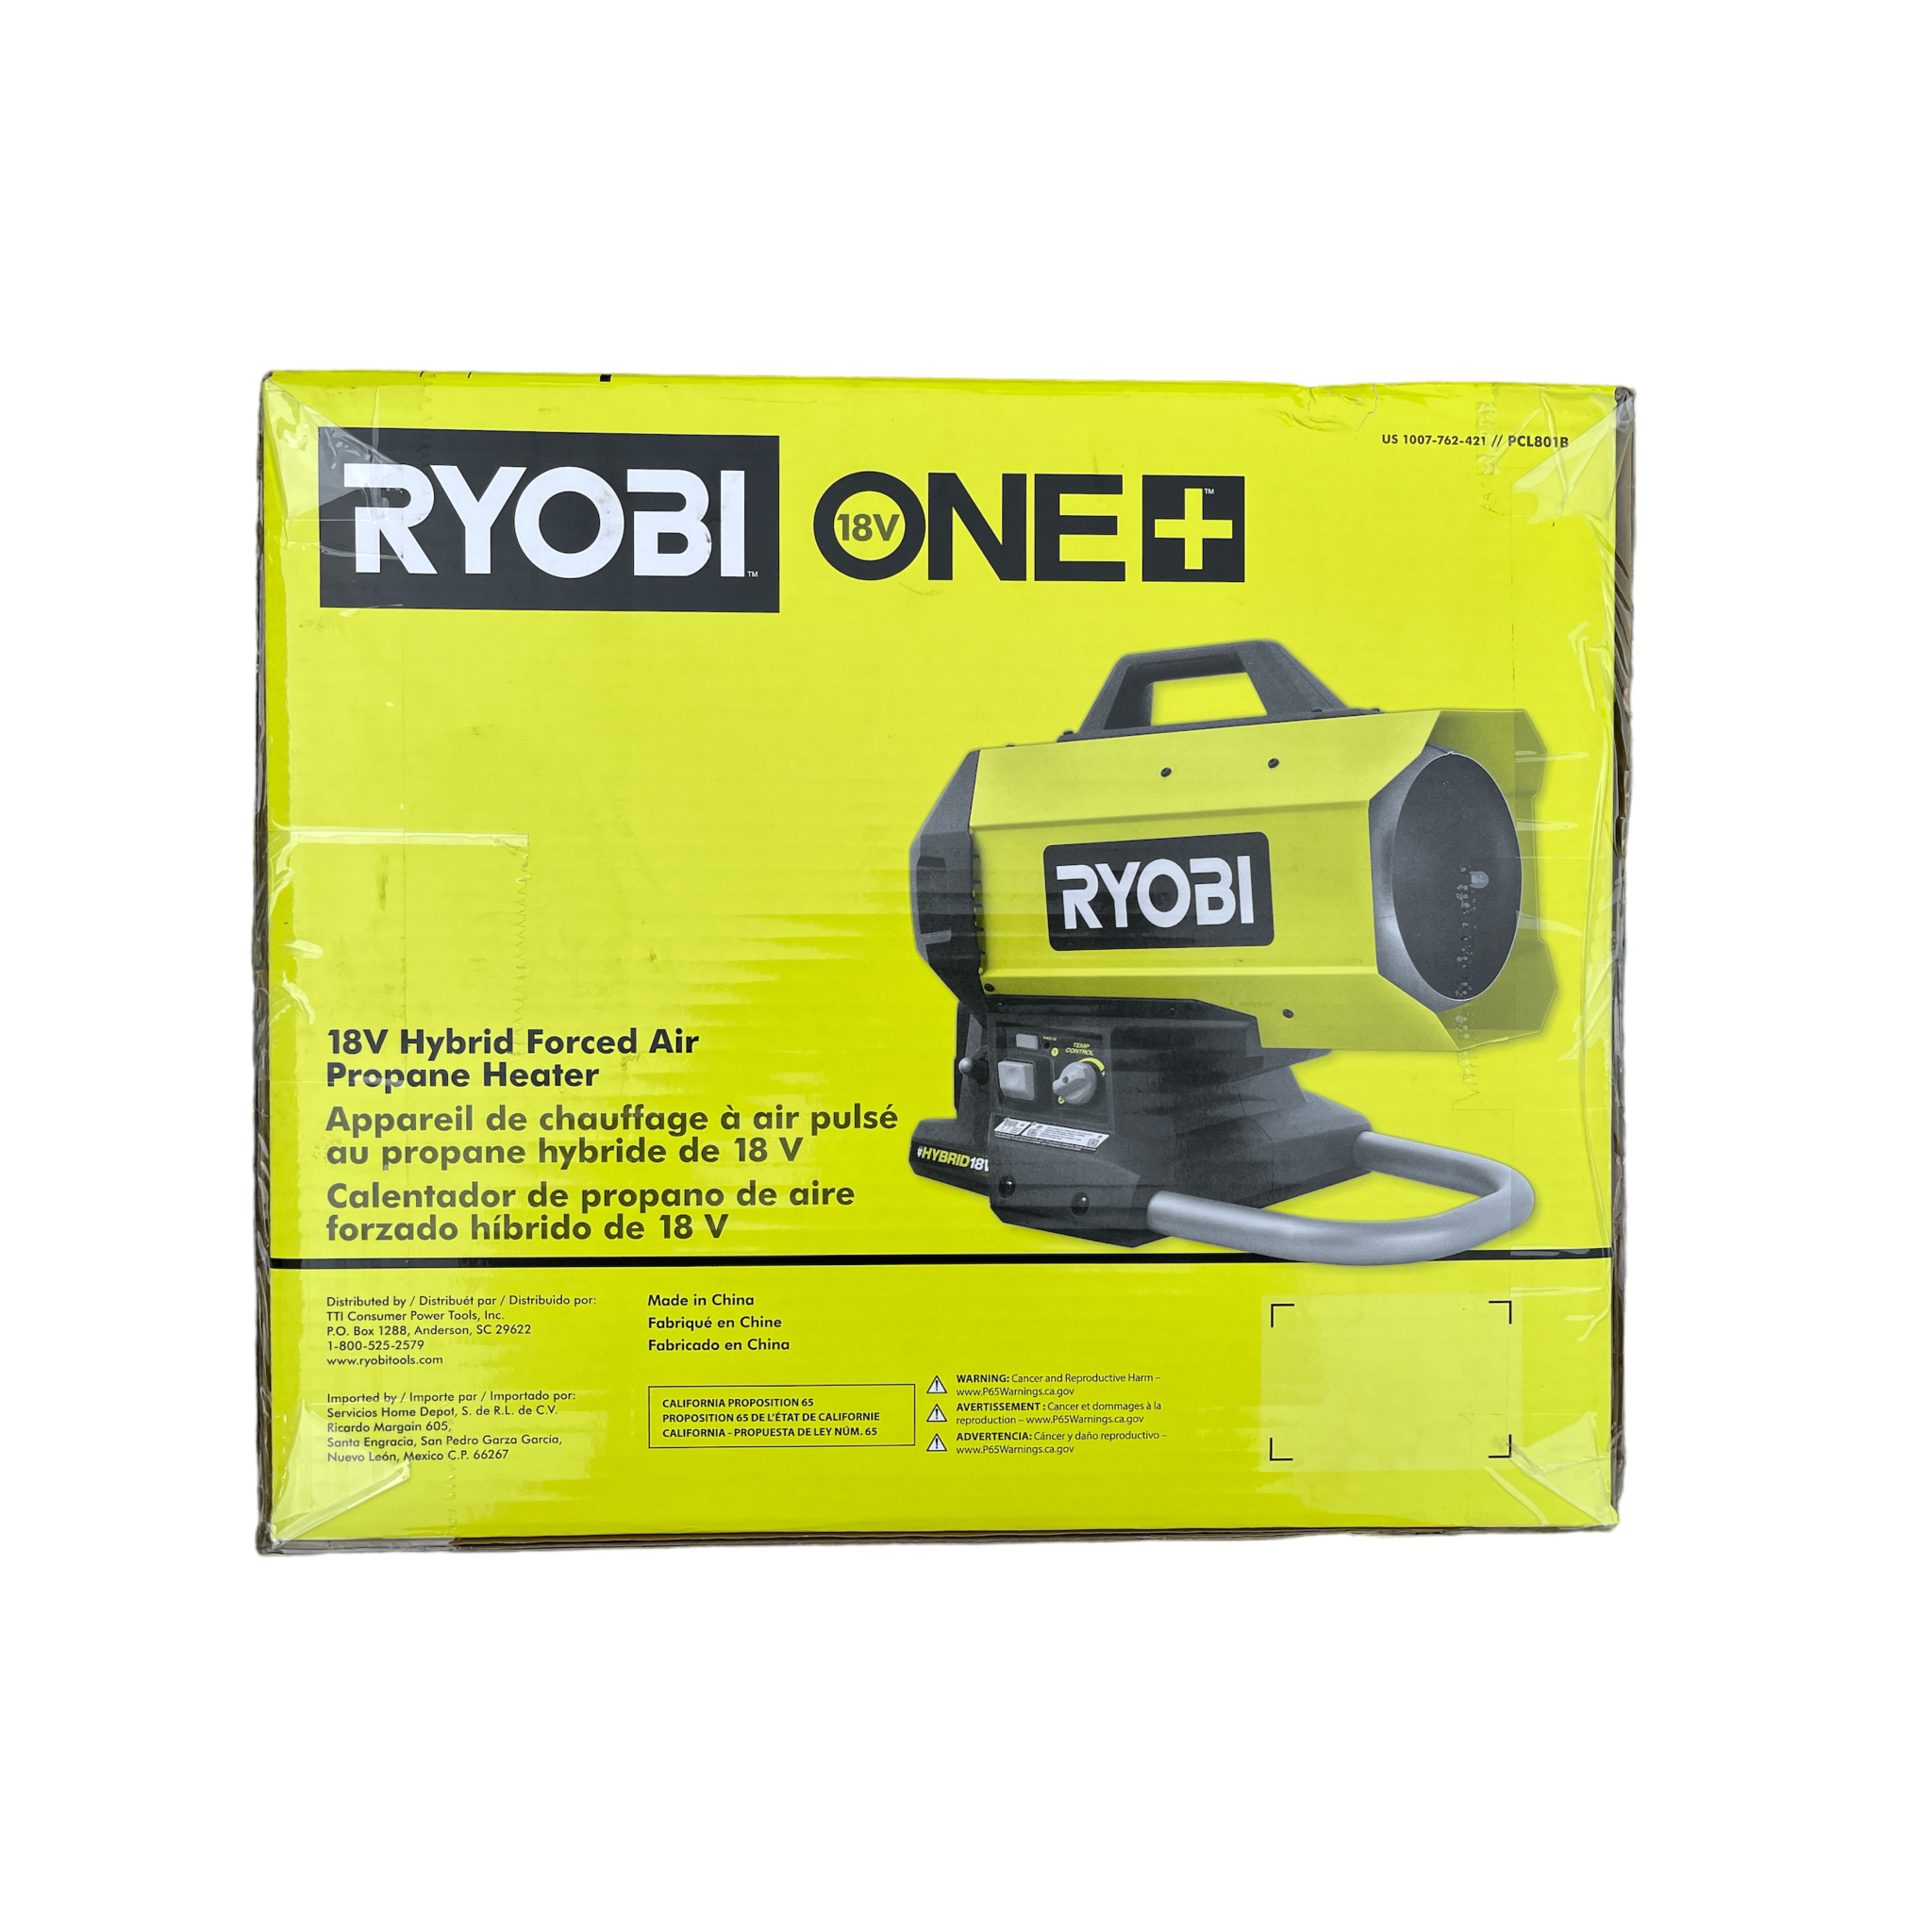 Ryobi ONE+ 18V Cordless Hybrid Forced Air Propane Heater (Tool Only) for  Sale in Conroe, TX - OfferUp